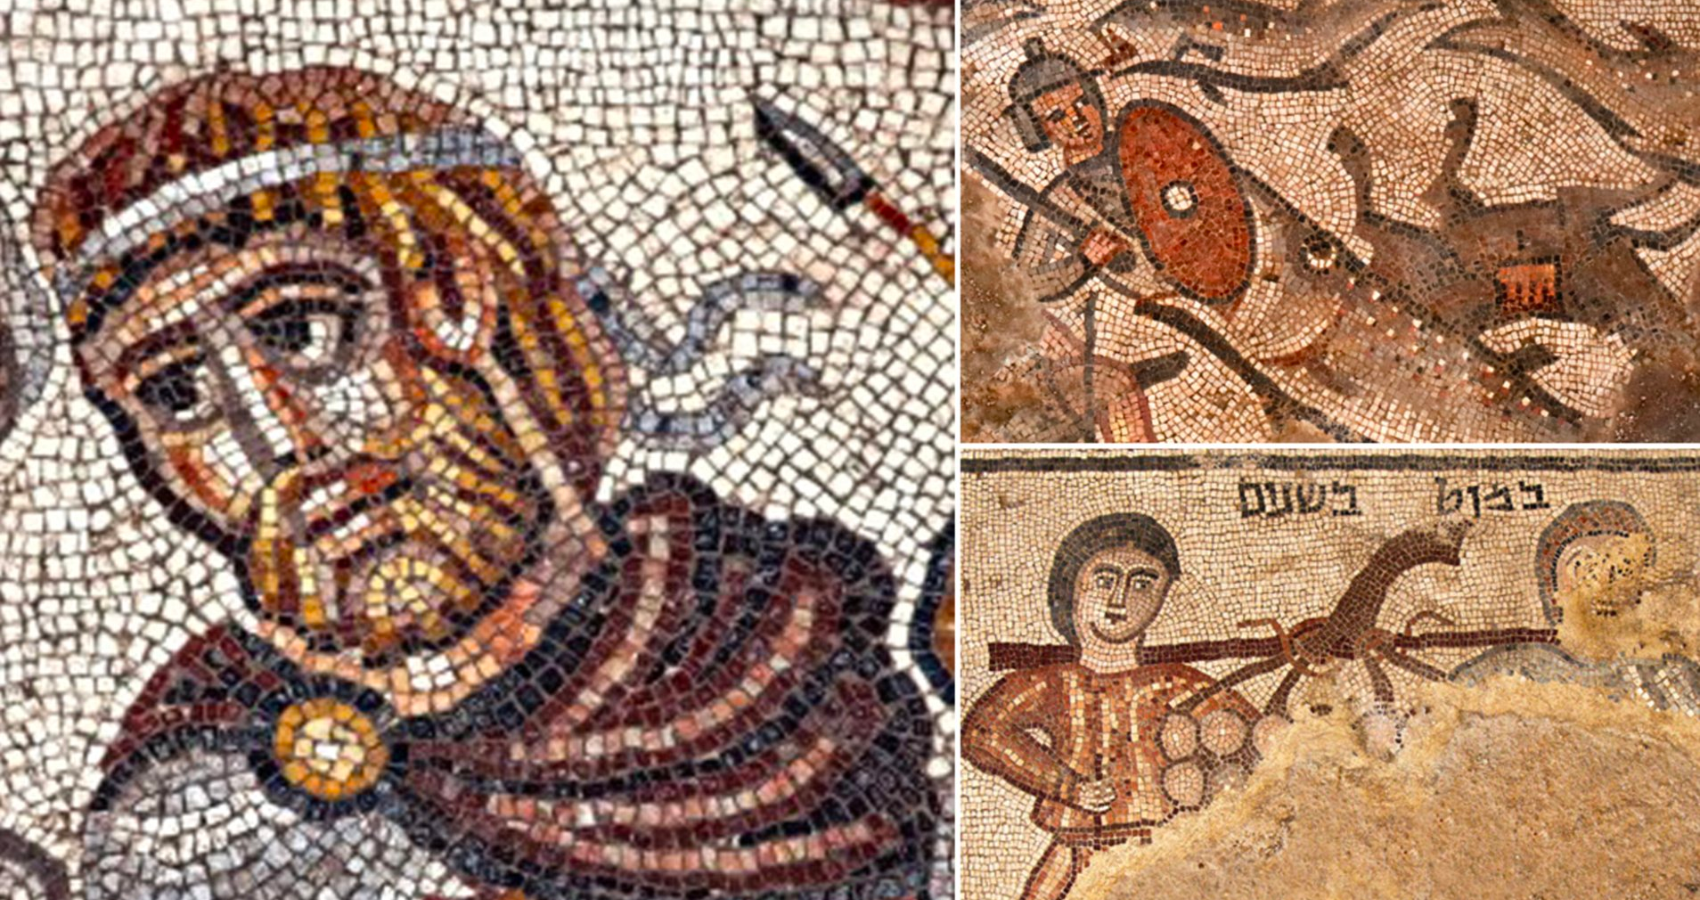 Mosaics with Old Testament Scenes Revealed in Roman-Era Synagogue in Israel